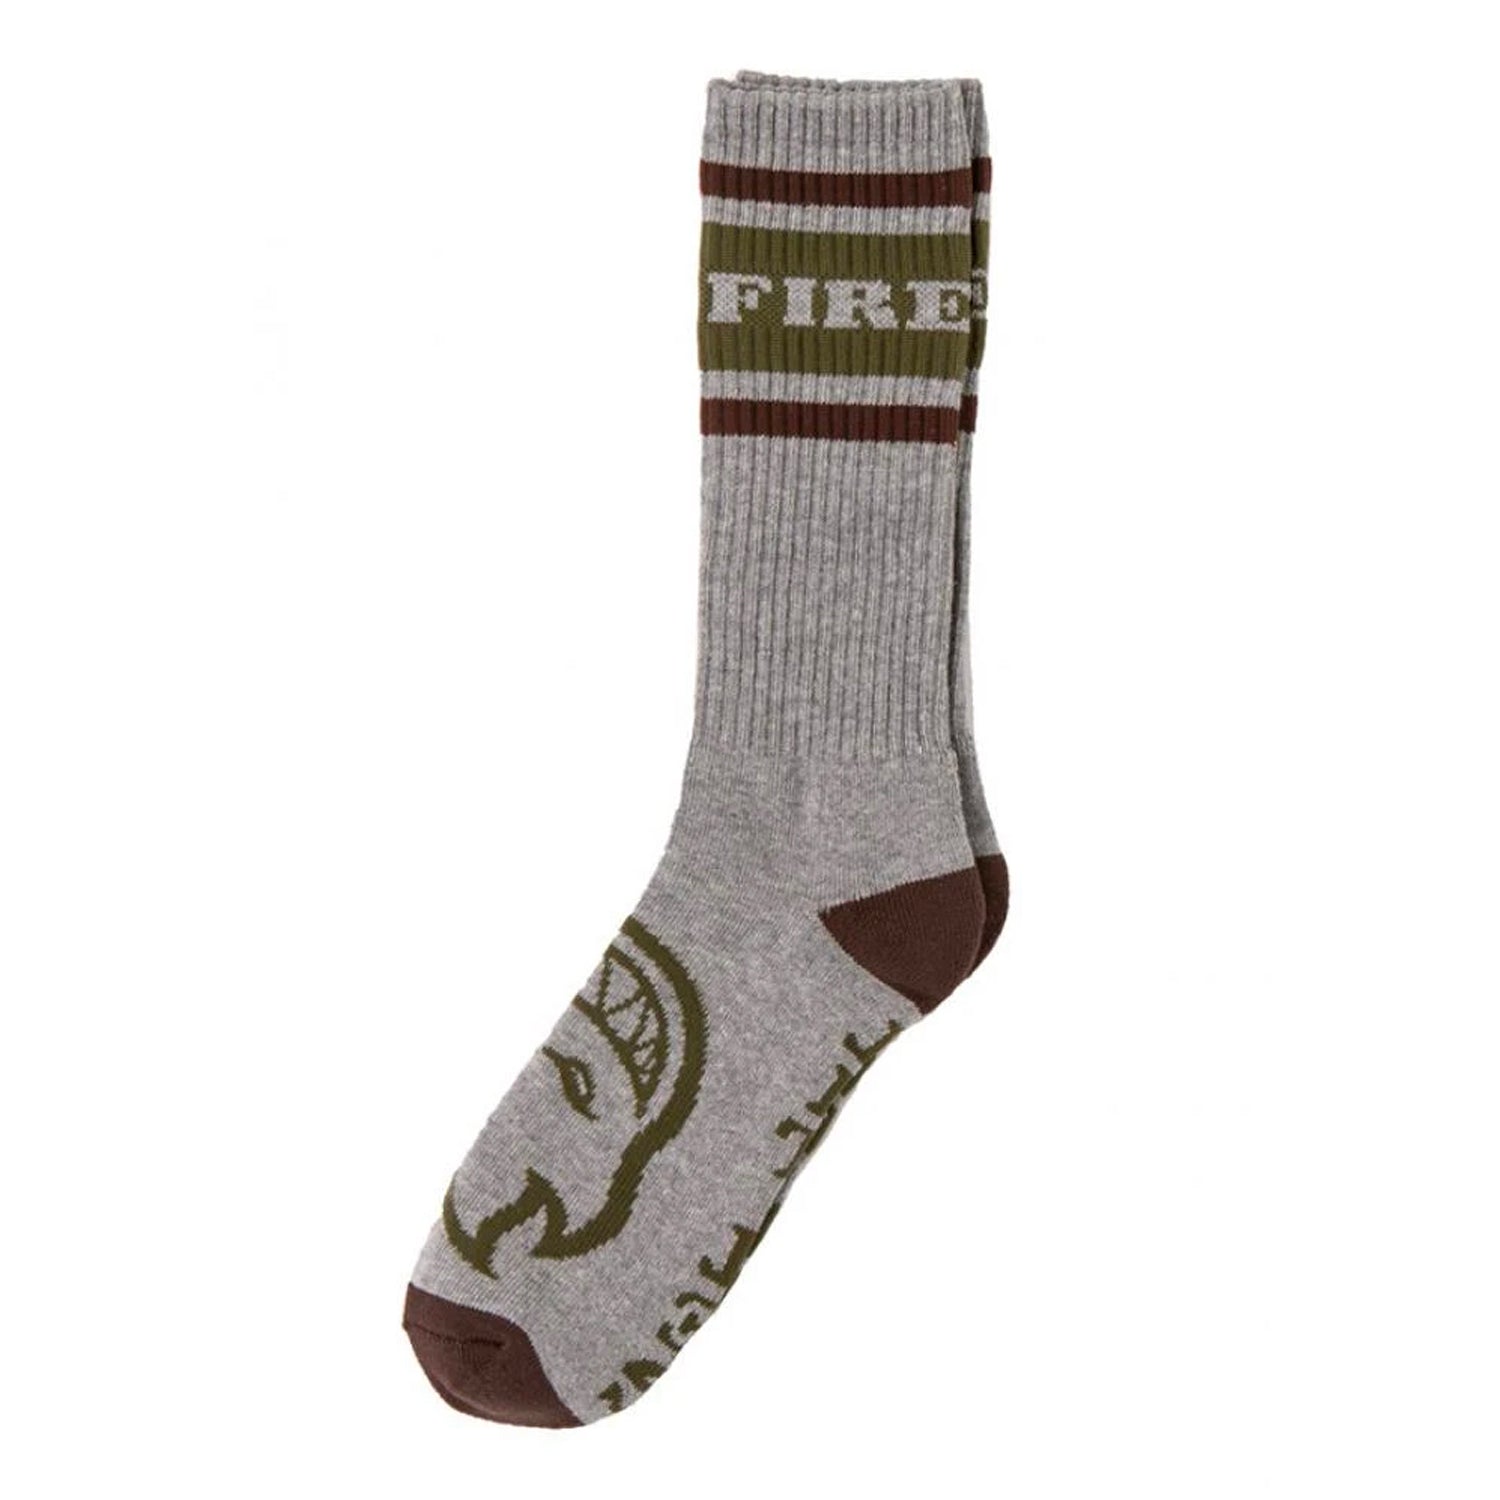 Spitfire Socks Og - Classic Heather Grey / Brown / D.Army - Prime Delux Store